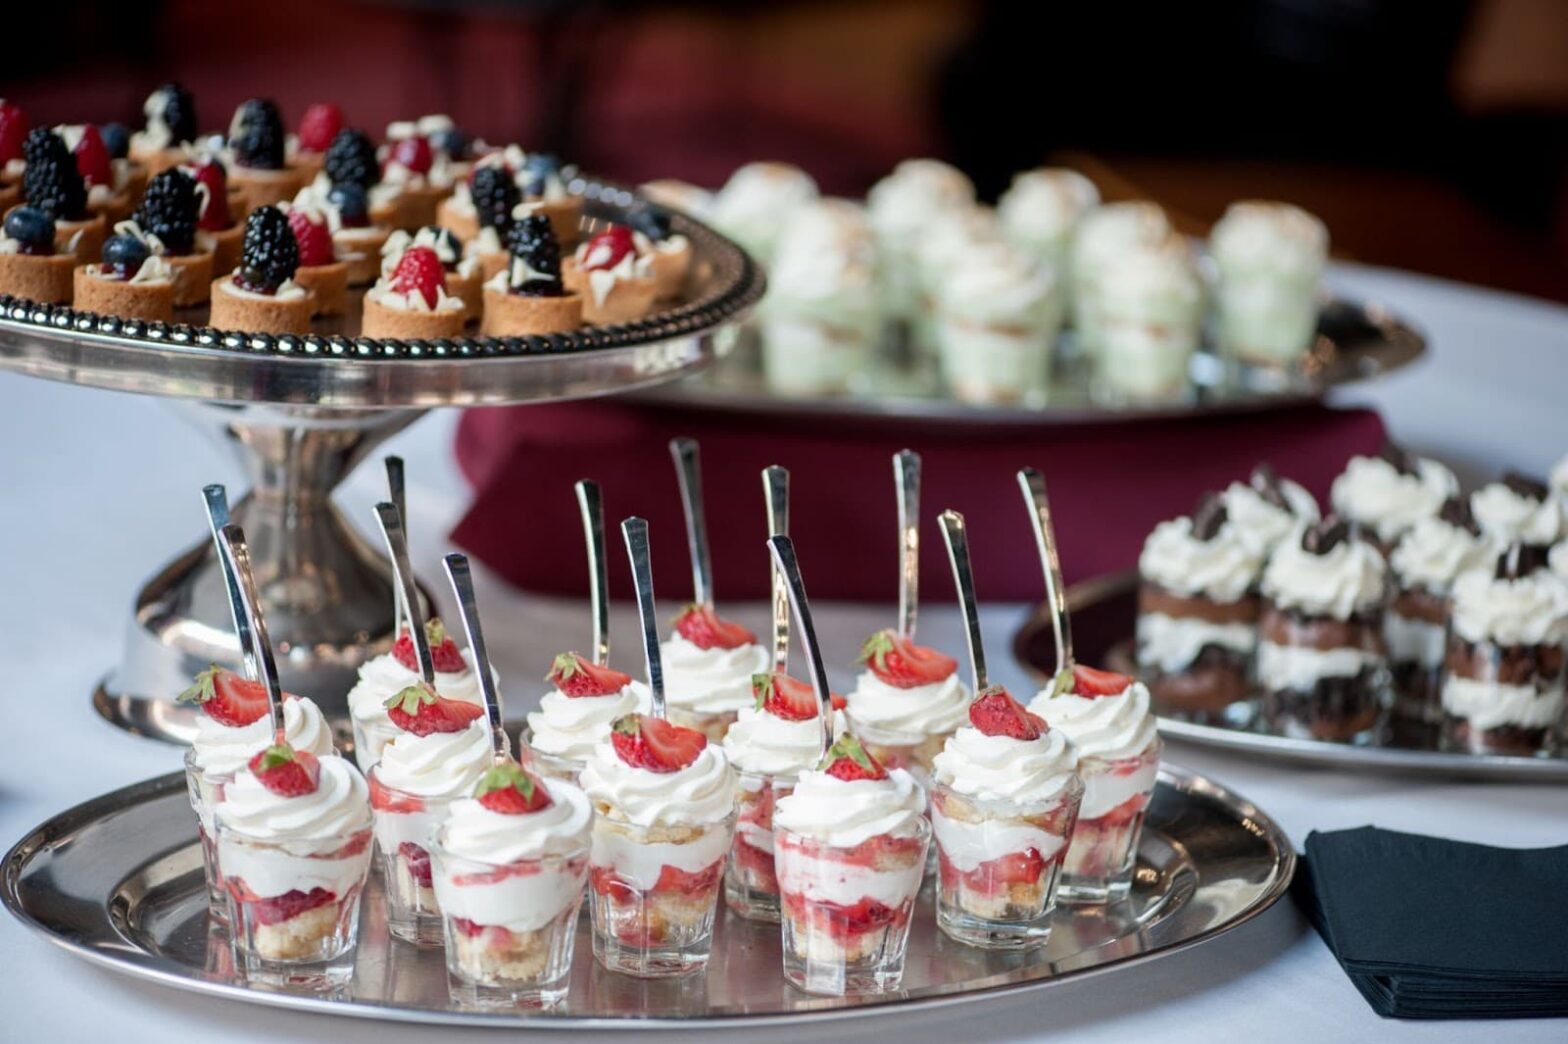 Featured image for post: Best Dessert Options for Wedding Receptions